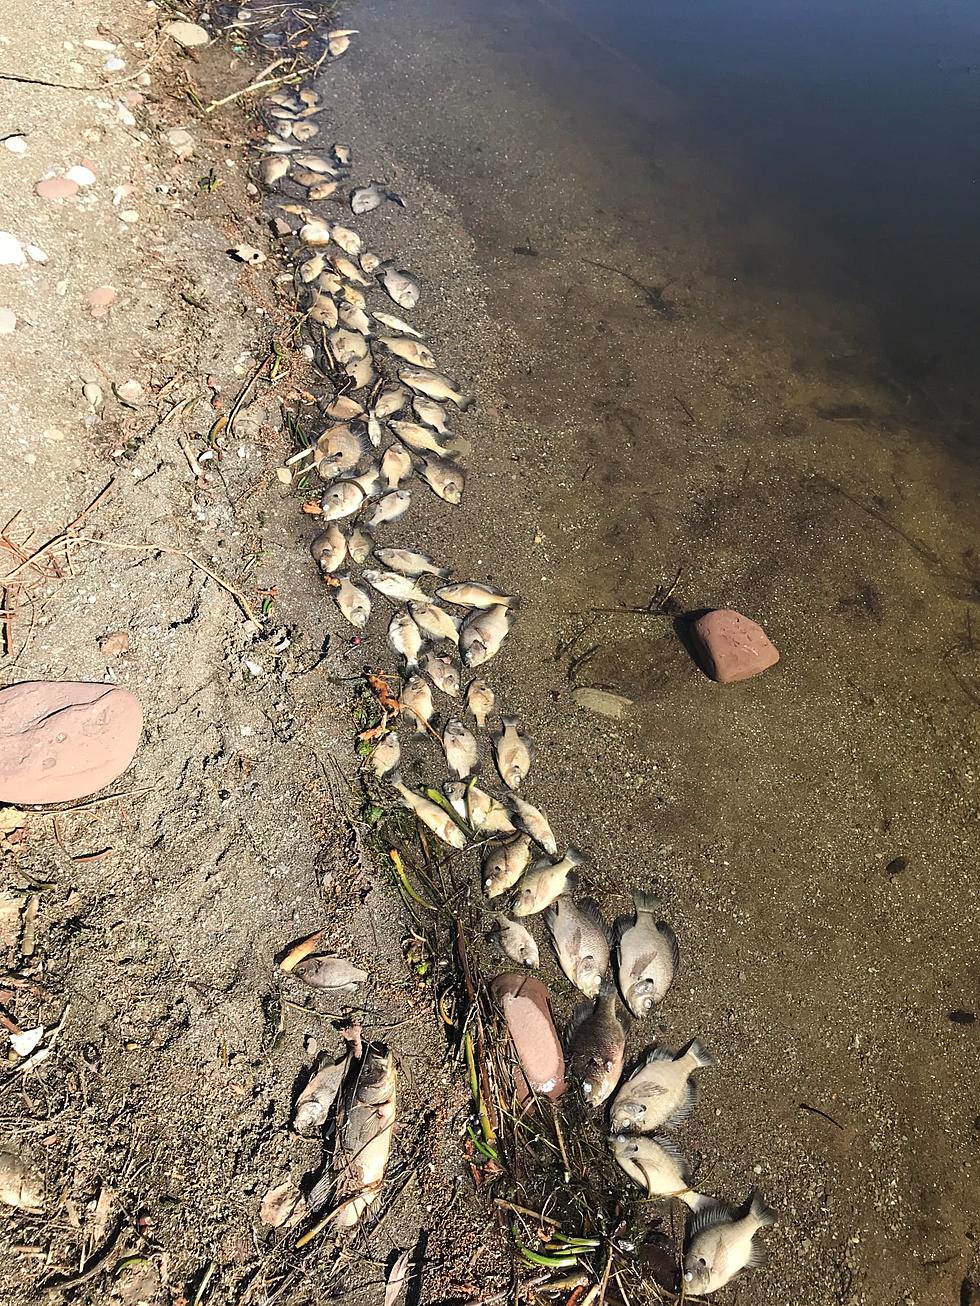 Dead Fish and Dead Deer: What’s Causing the Carnage in the Hudson Valley?